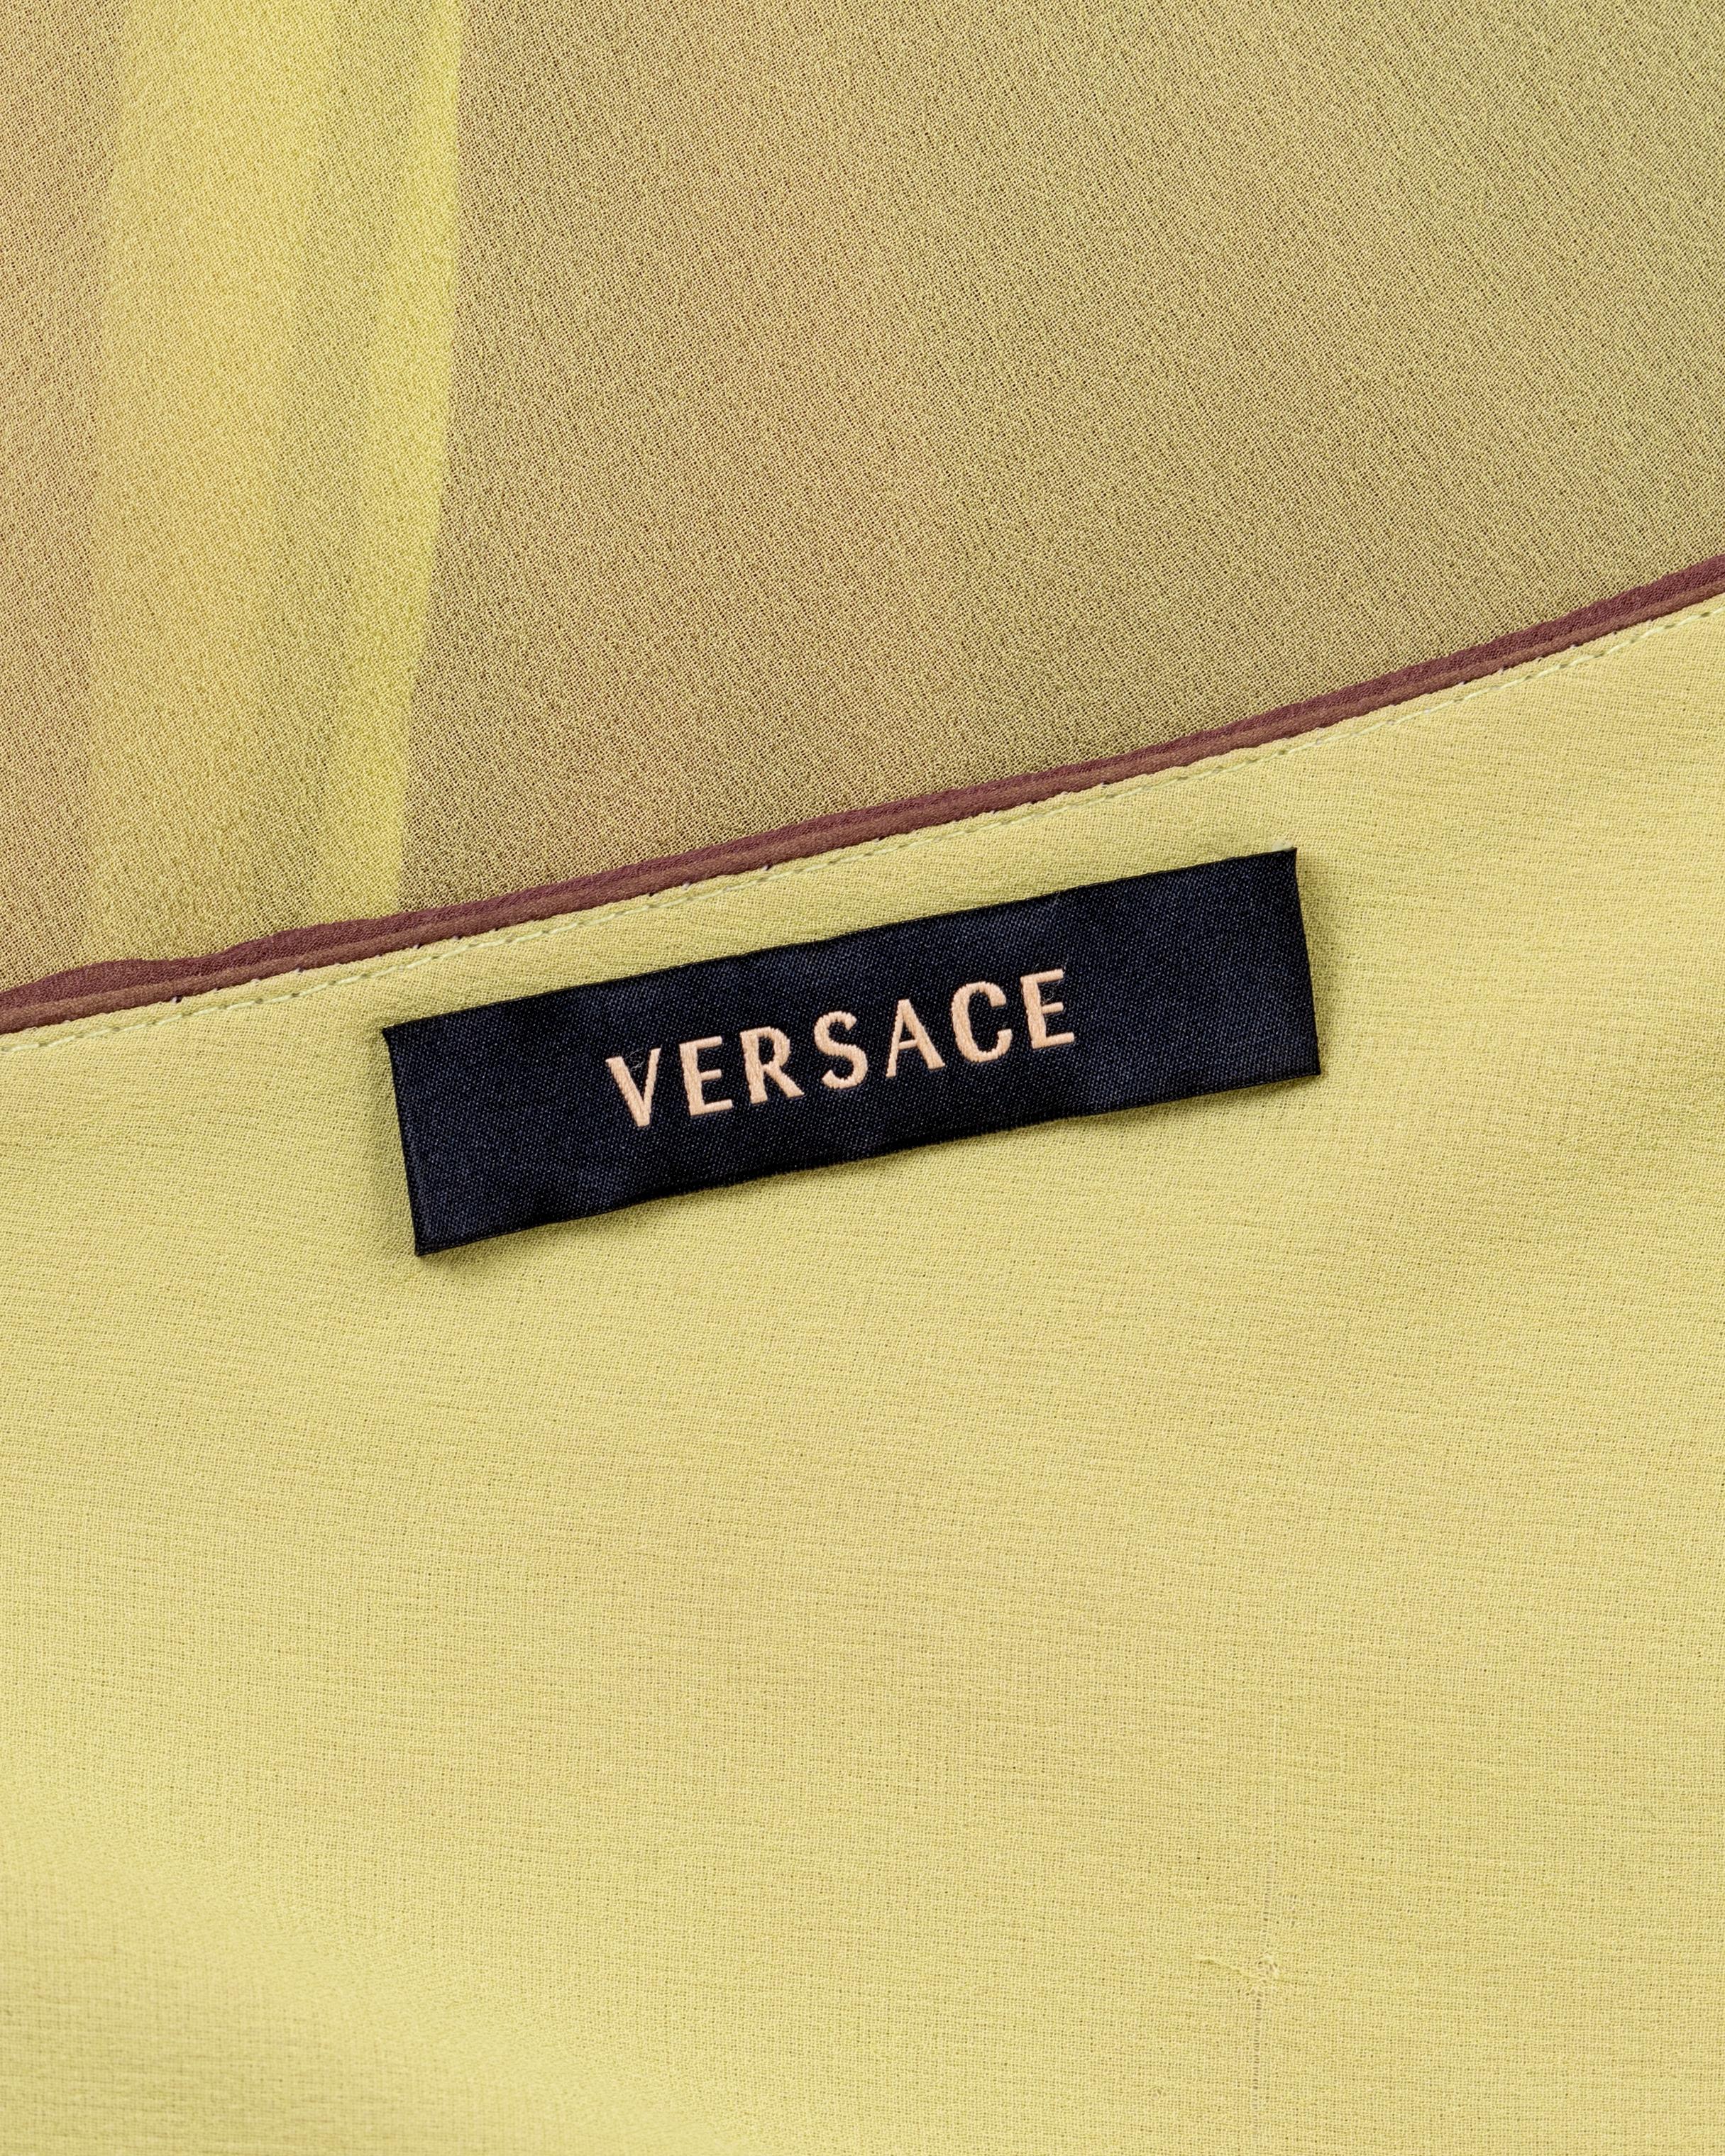 Versace plum and chartreuse ombré pleated silk chiffon evening dress, ss 2006 For Sale 5